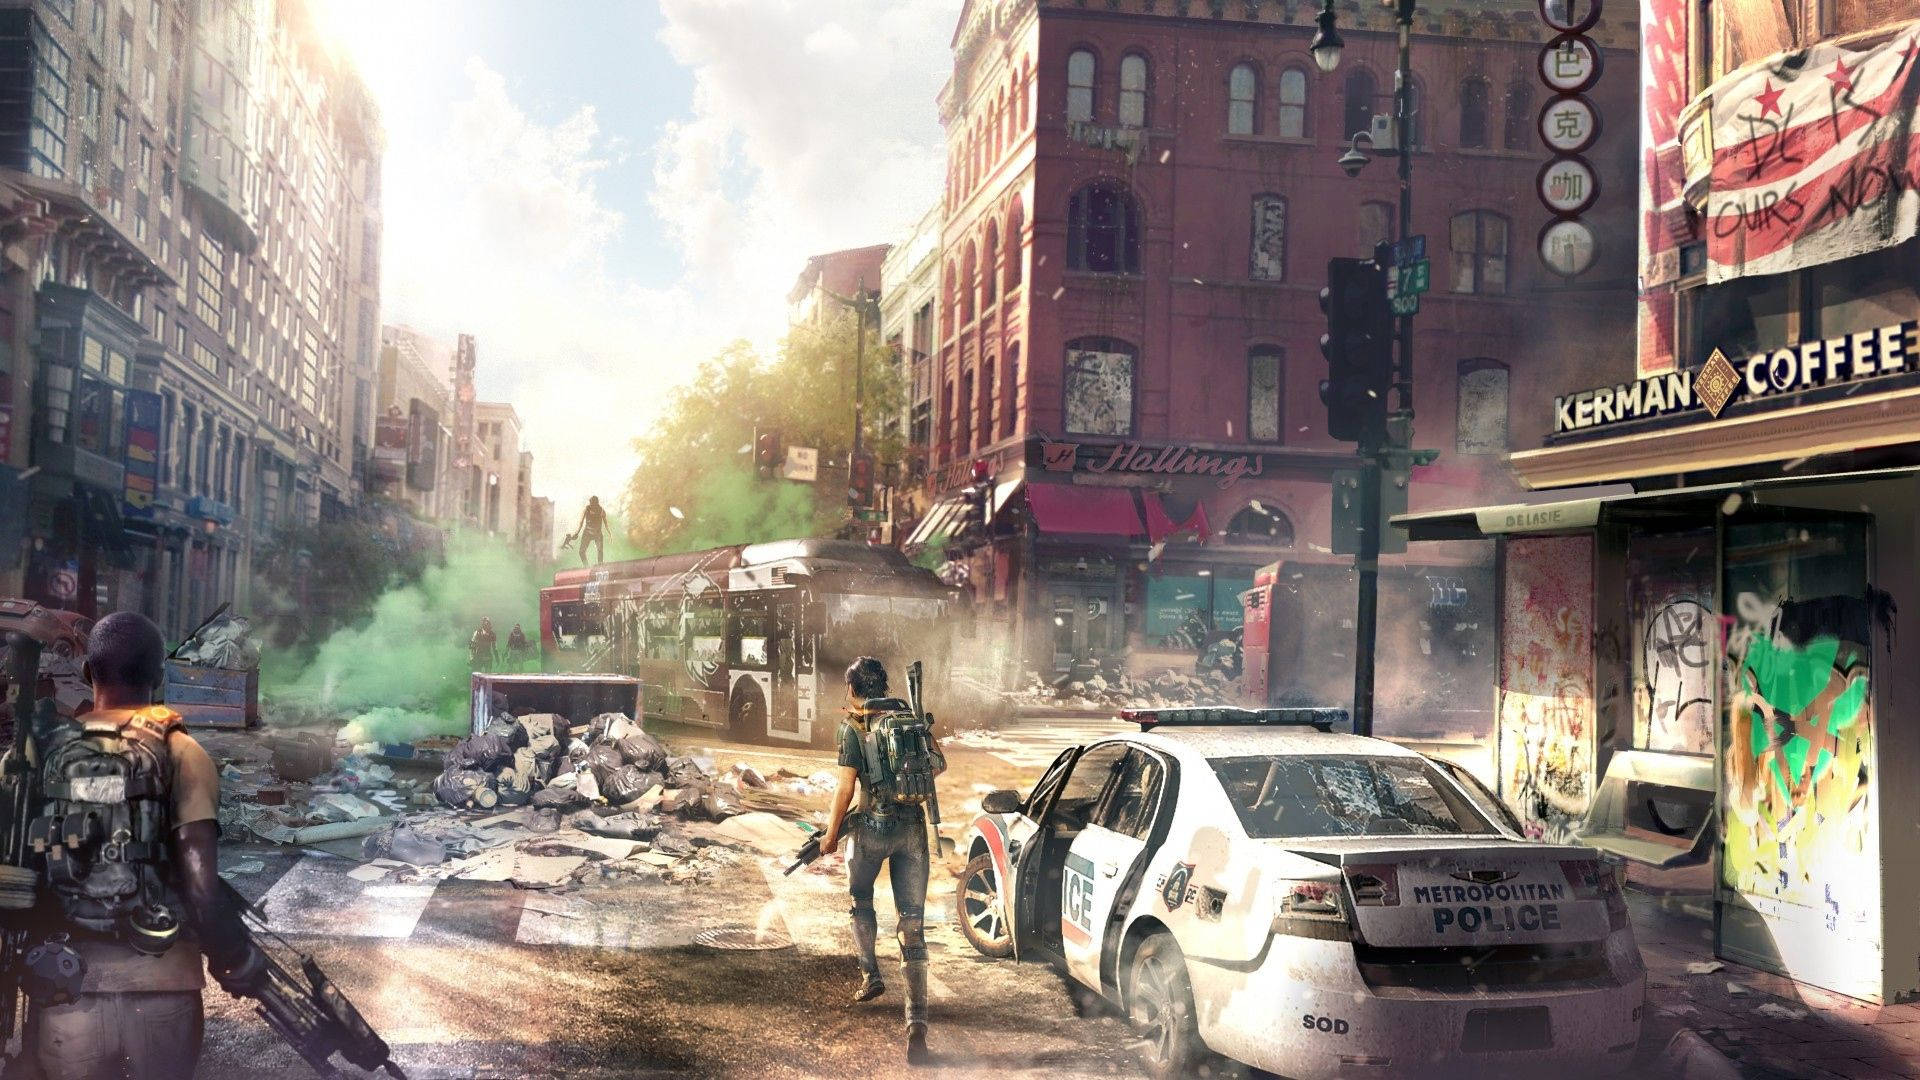 Explore a post-apocalyptic Washington DC in The Division 2 Wallpaper